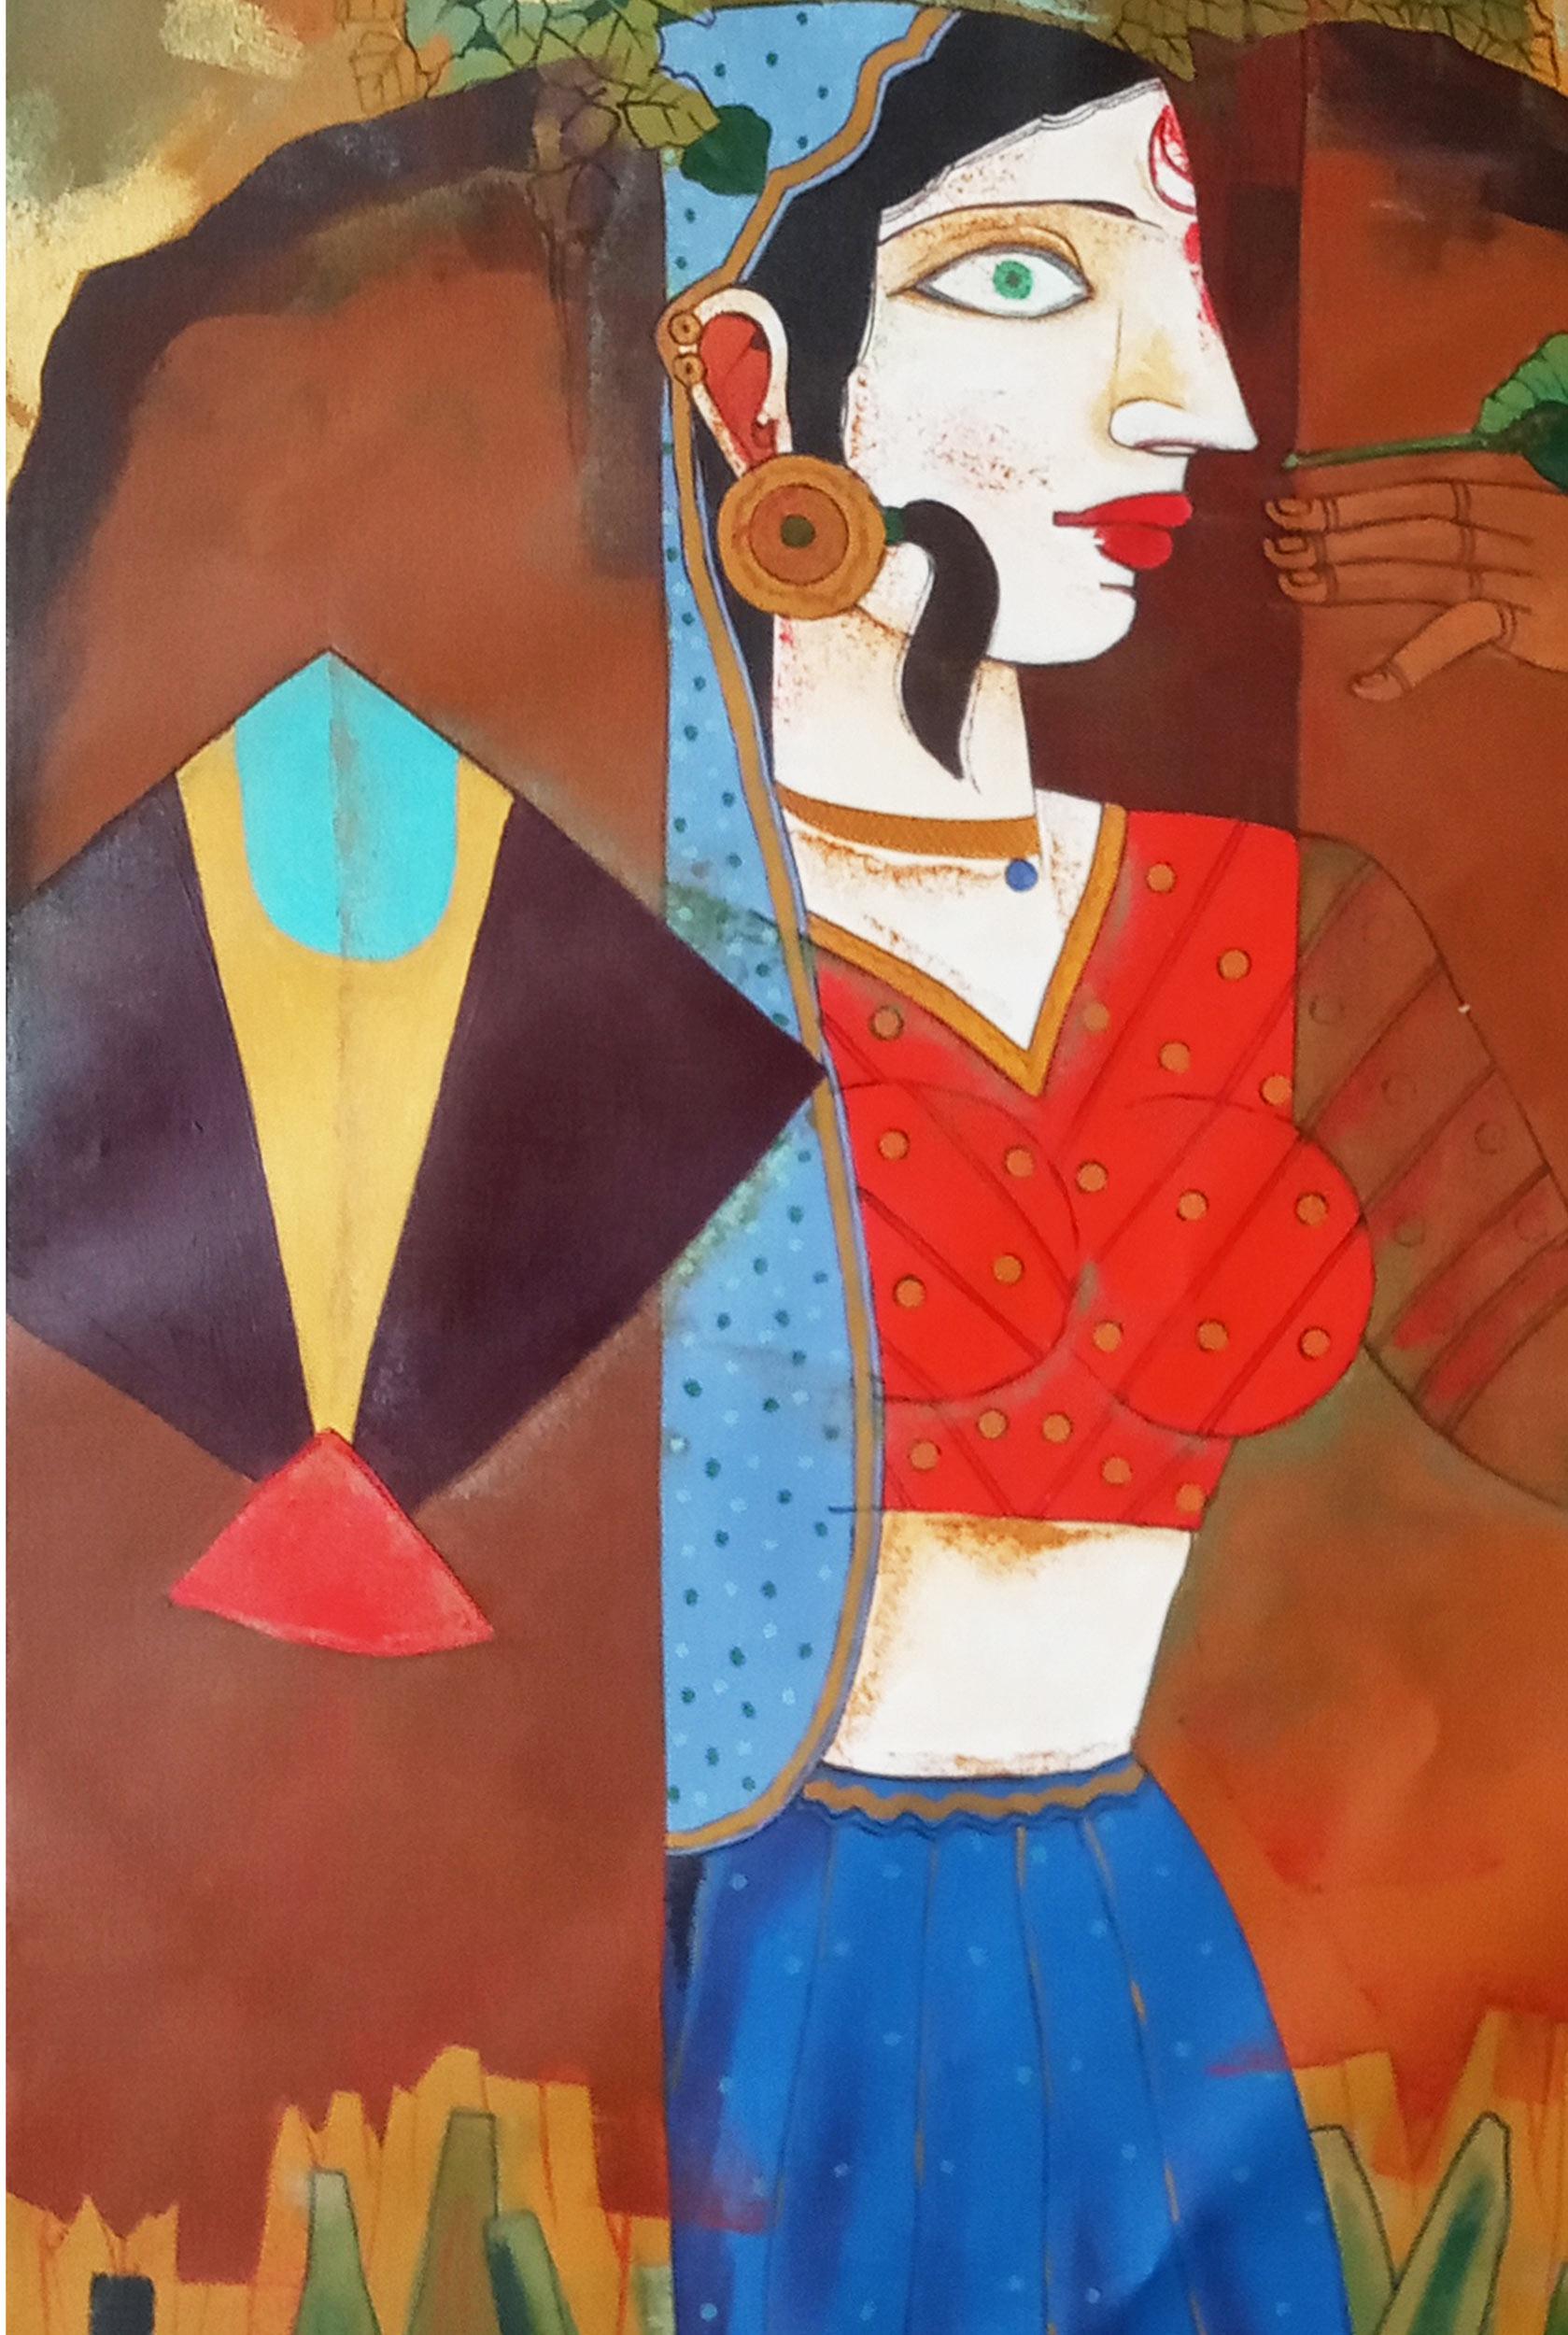 Woman flying Kites, Acrylic on Canvas, Red, Blue, Green, Brown 